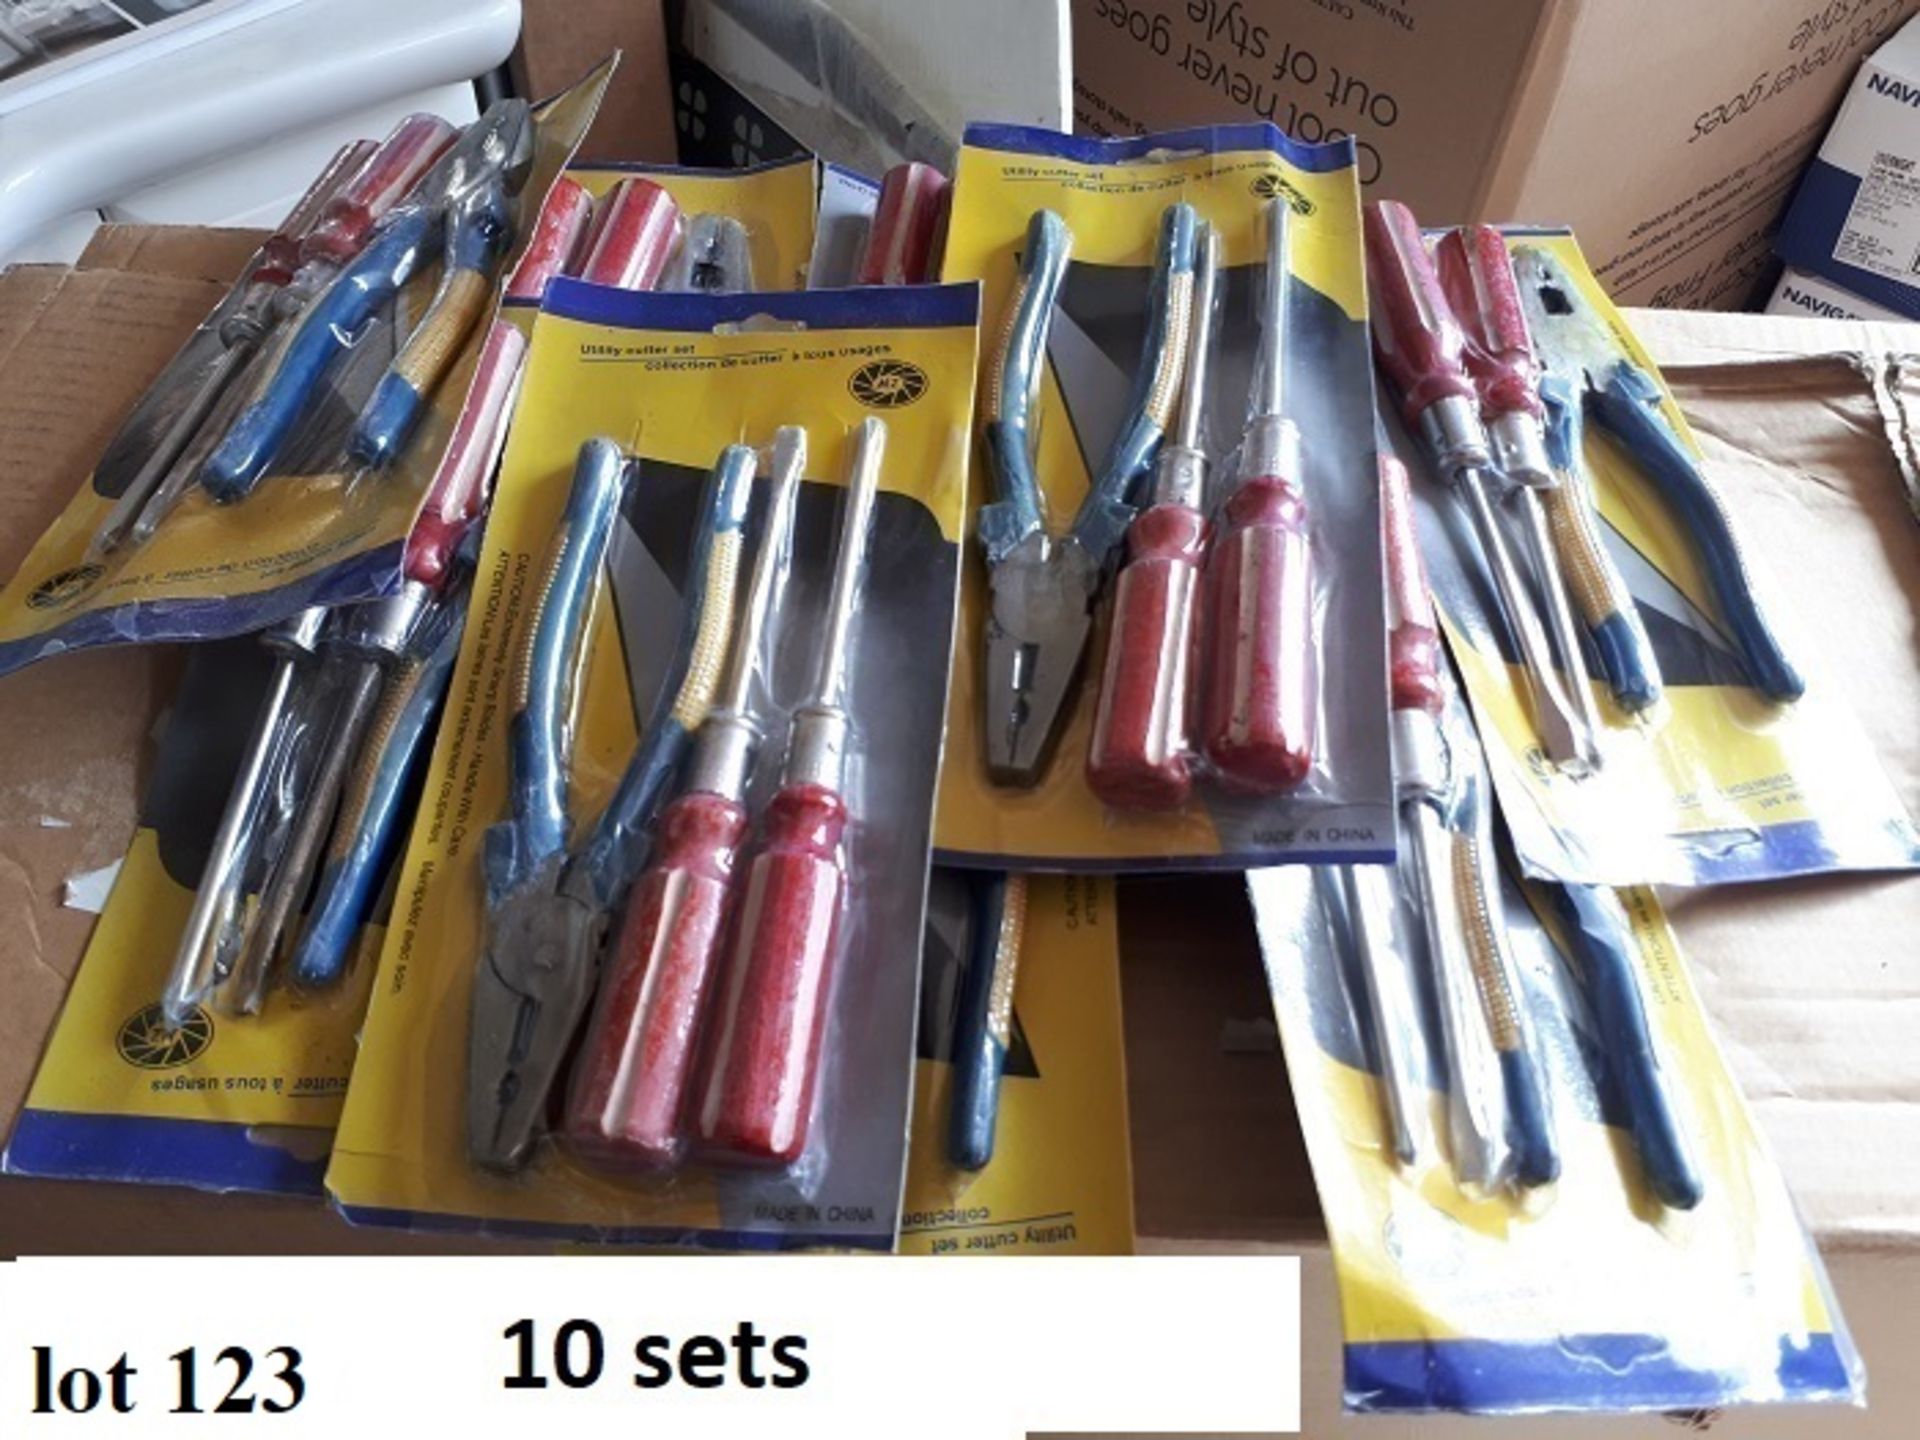 10 sets of tools, (plier & 2 screw drivers)